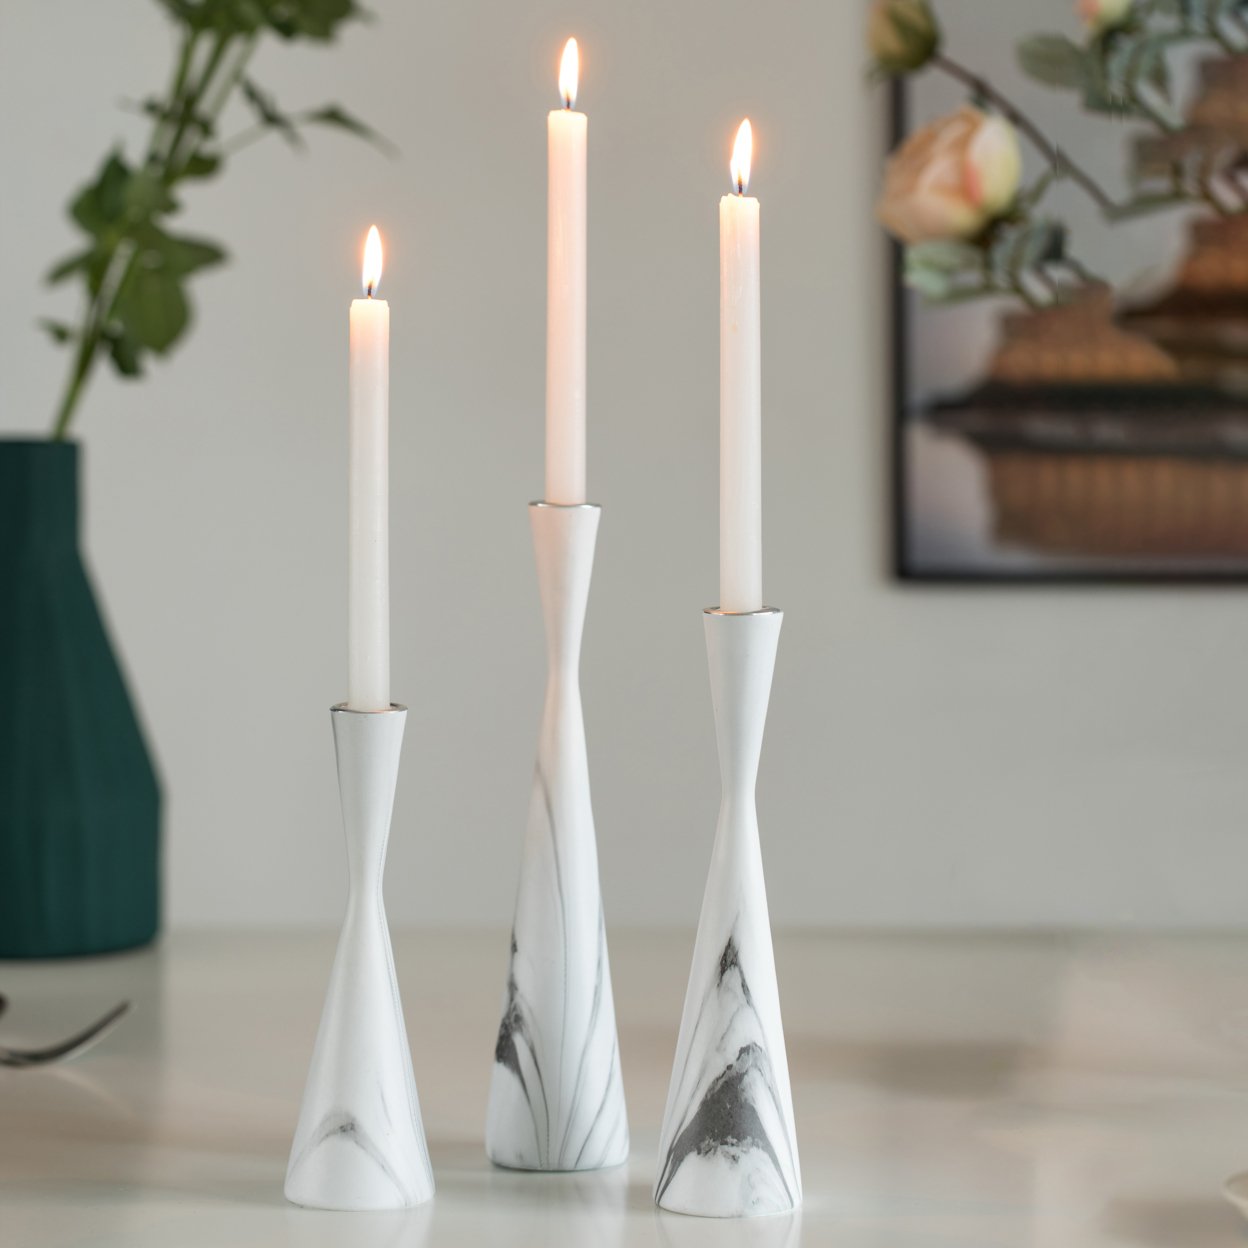 Set Of 3 Decorative Resin Taper Candle Holders, Marble Design Modern Candlesticks - Gray